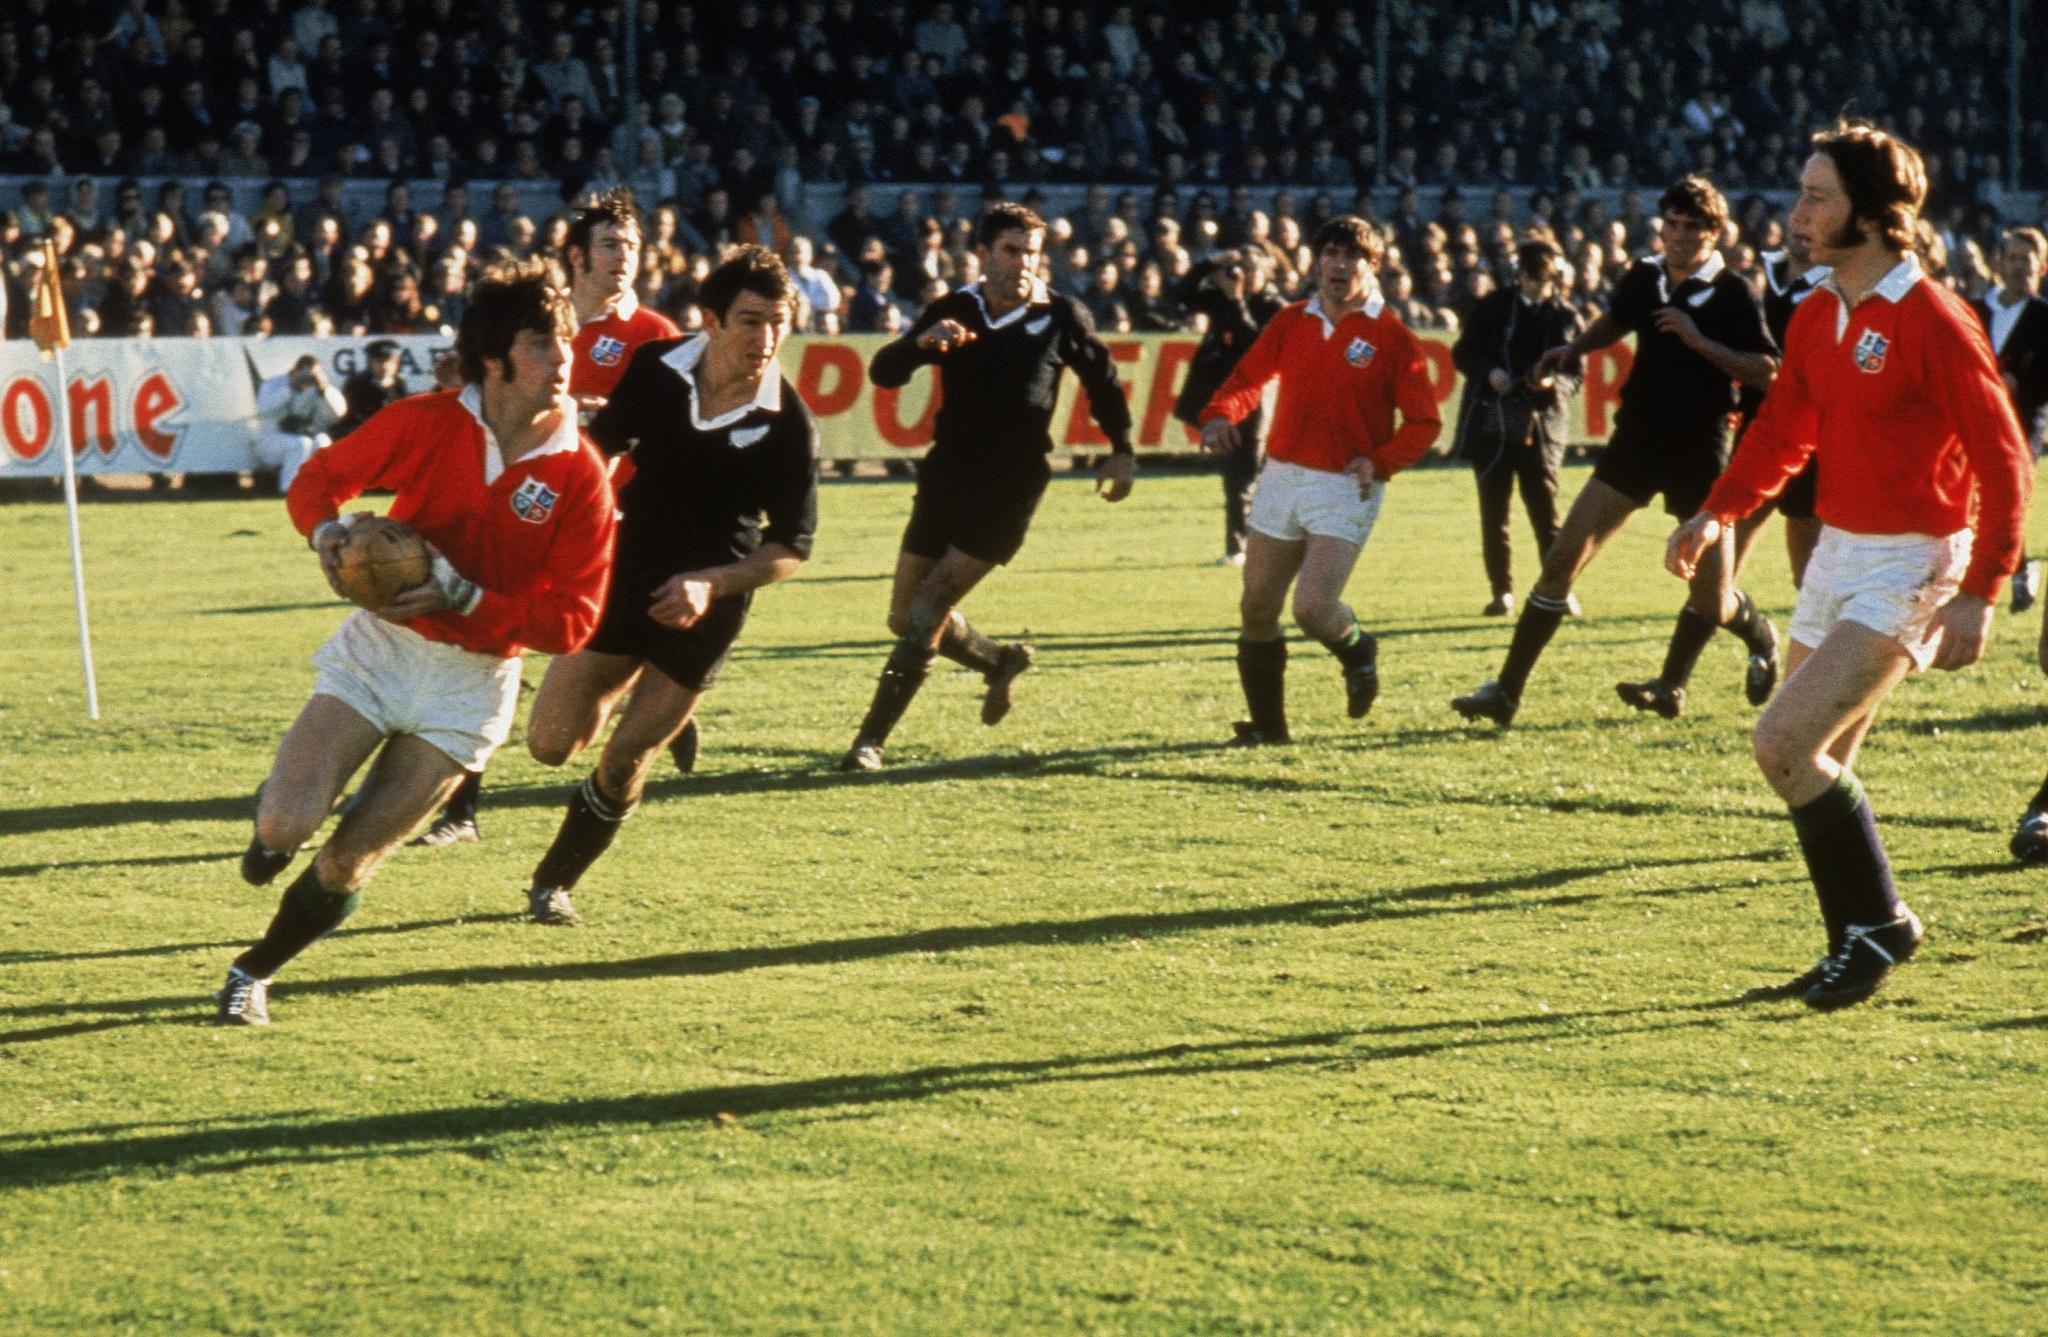 Barry John put on a fly-half masterclass when the lions beat New Zealand in 1971